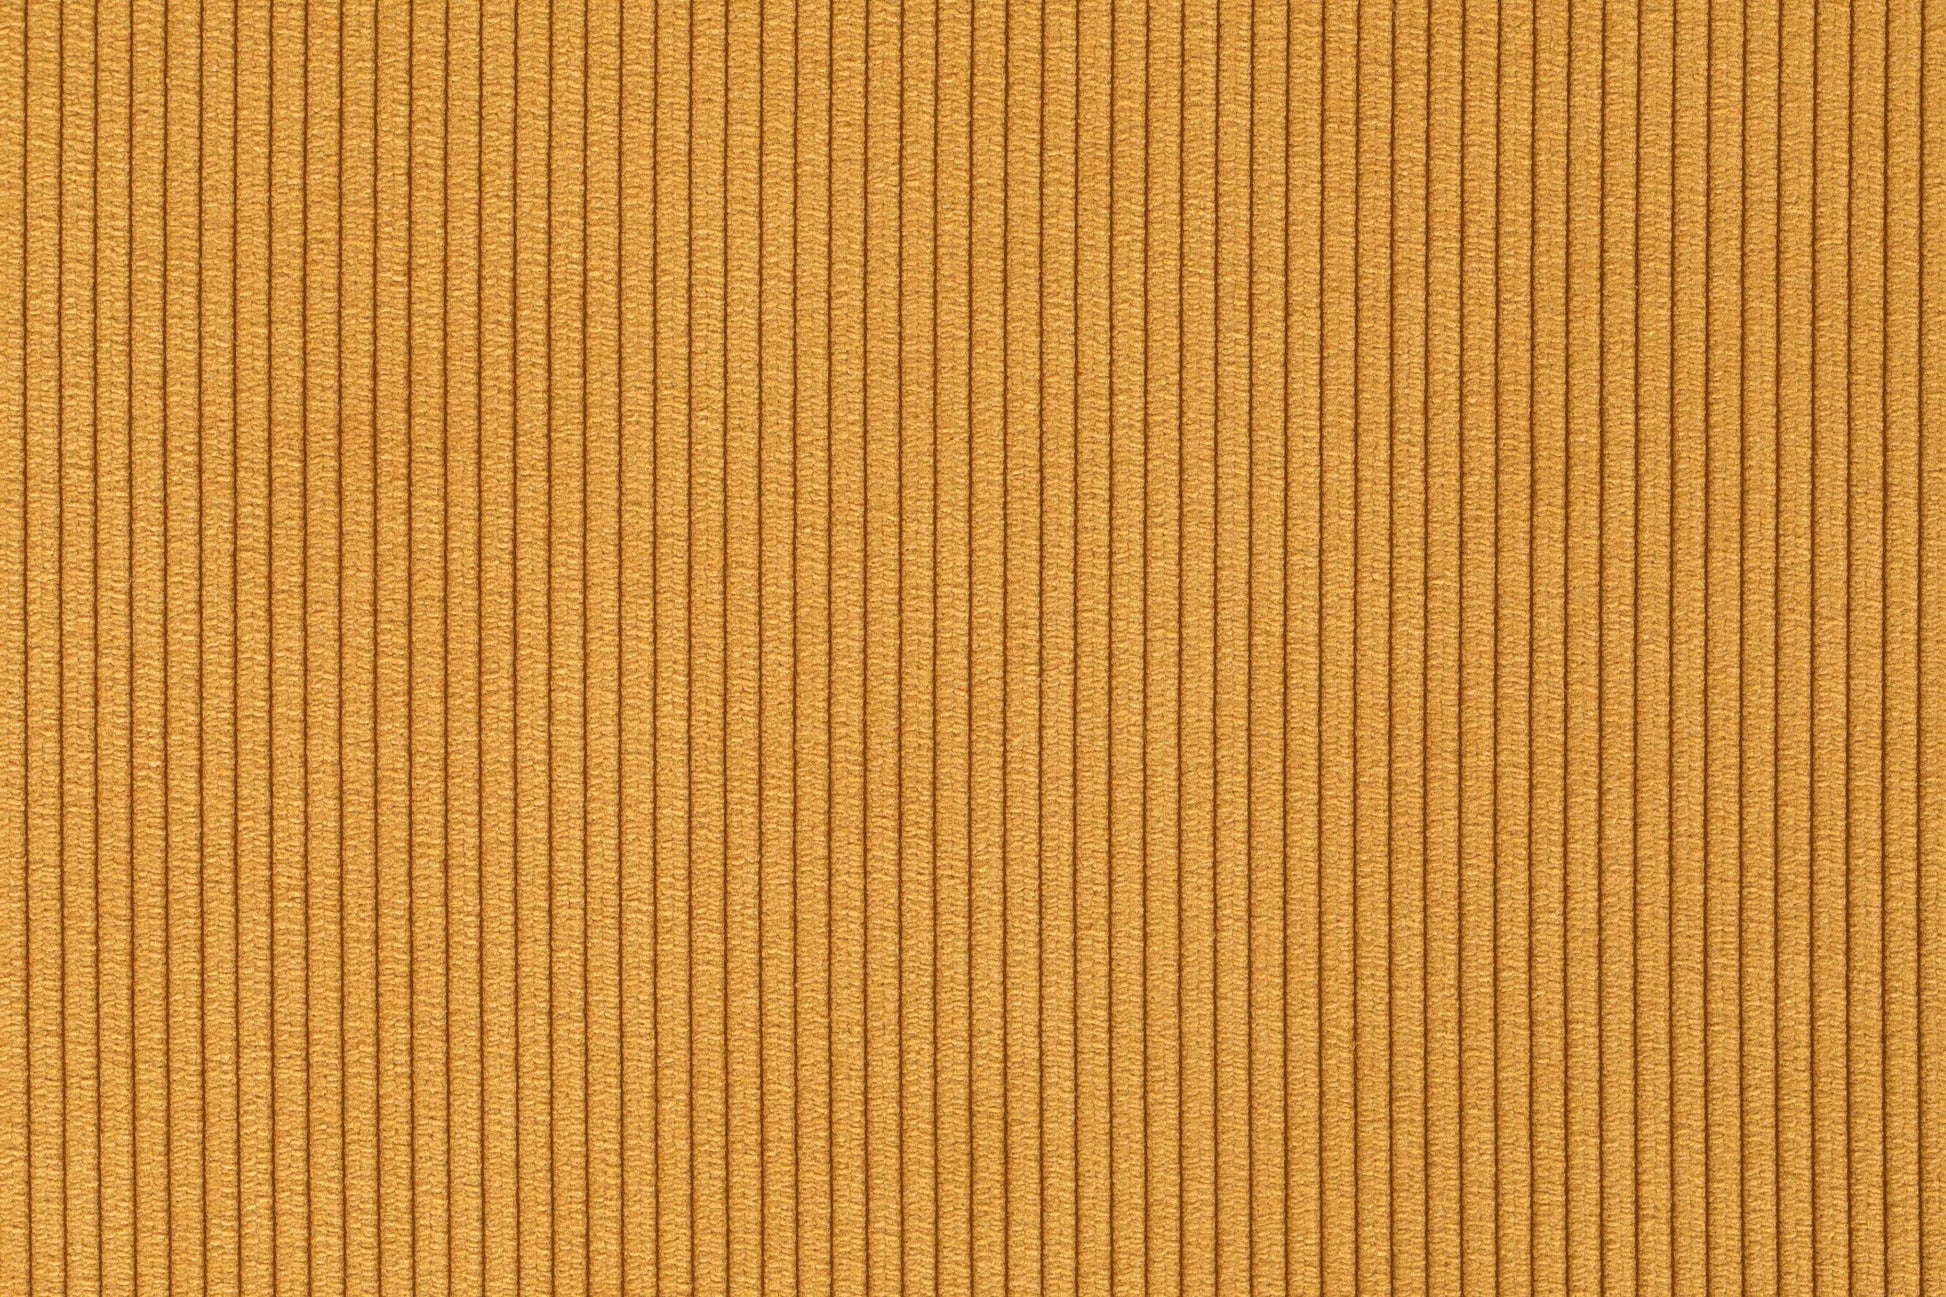 Zuiver | CHAIR RIDGE BRUSHED RIB YELLOW 24A Default Title